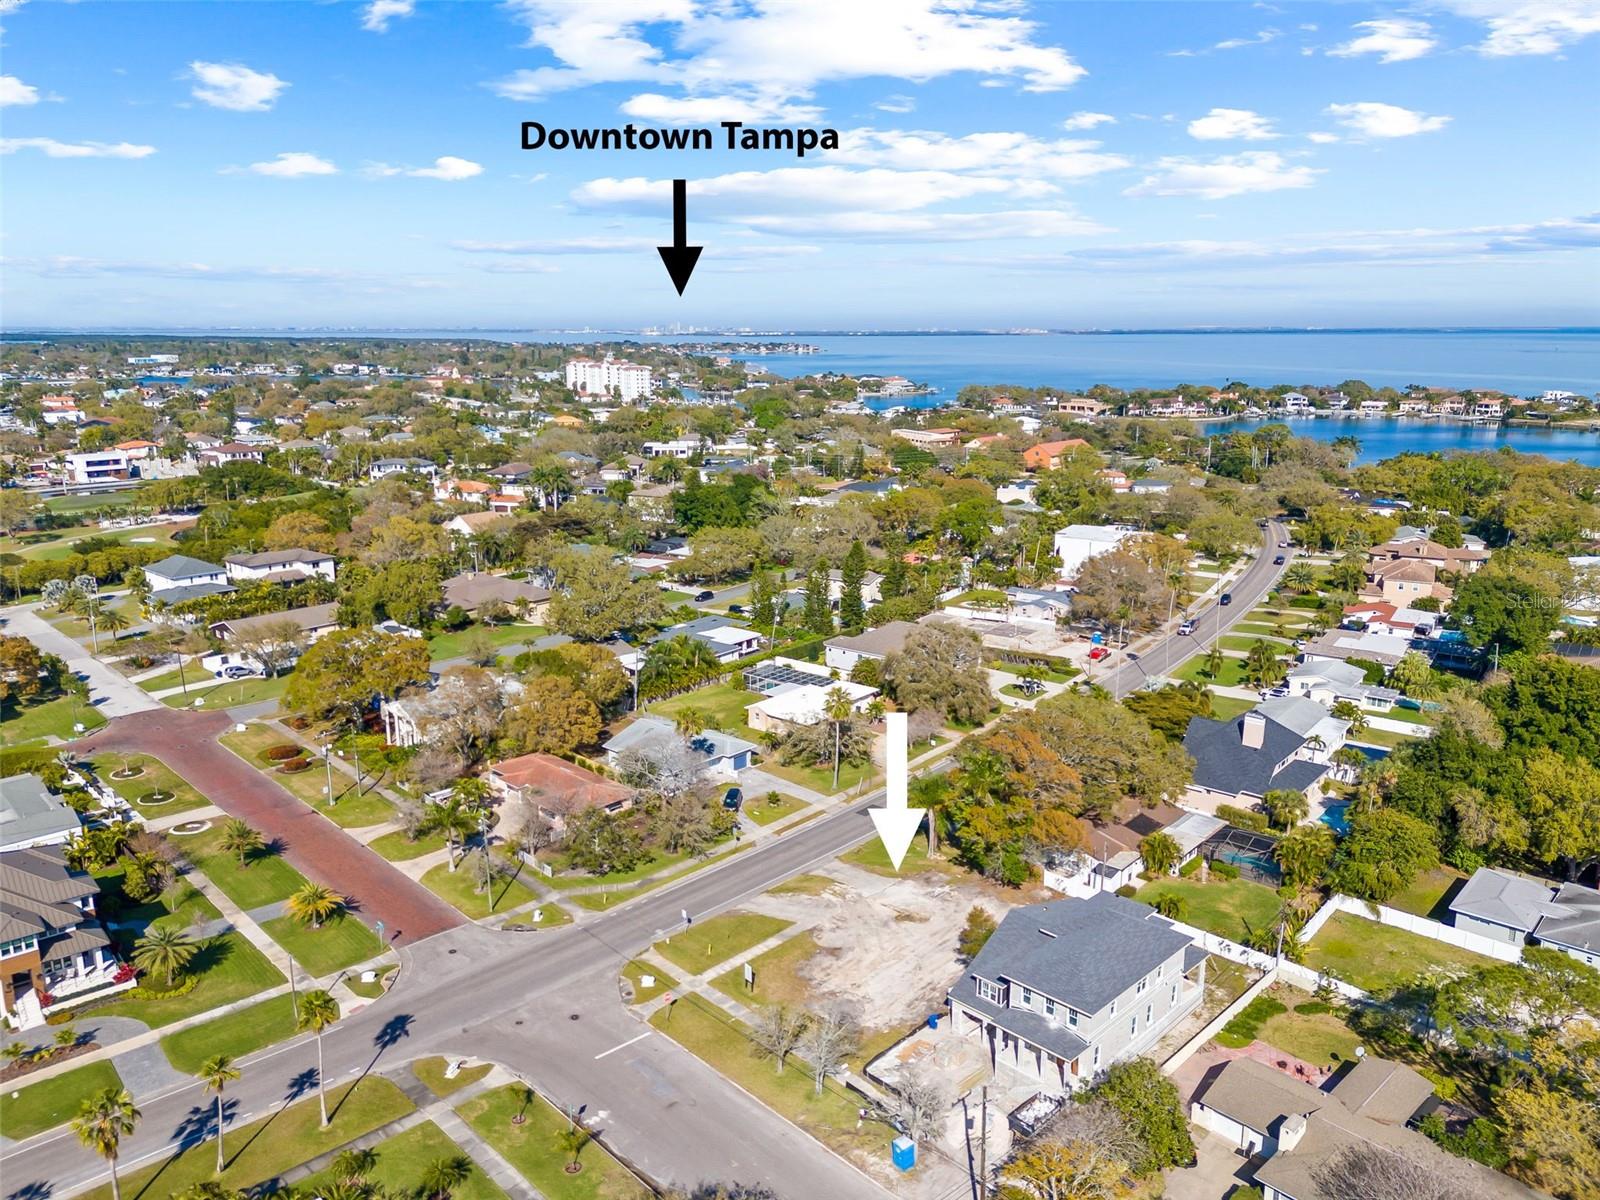 This home location provides easy access to Tampa.